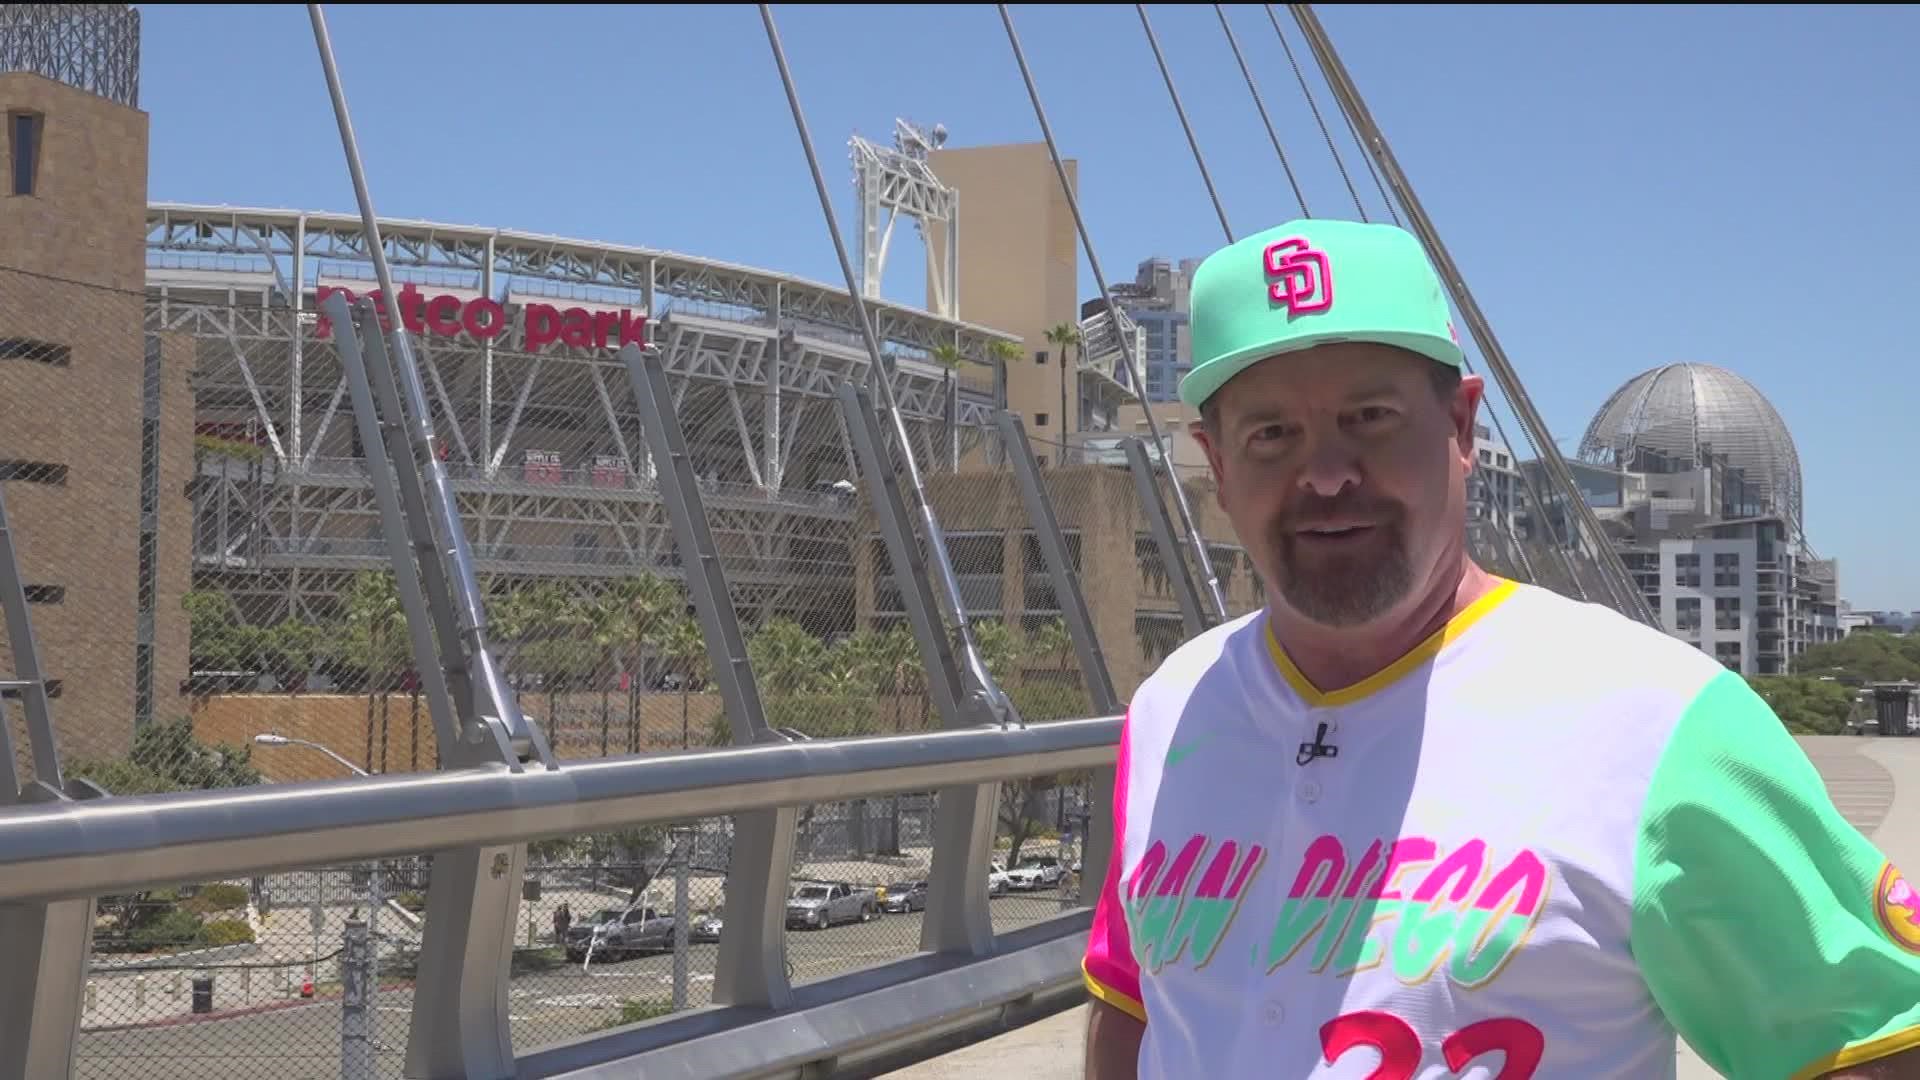 padres city connect jerseys 2022